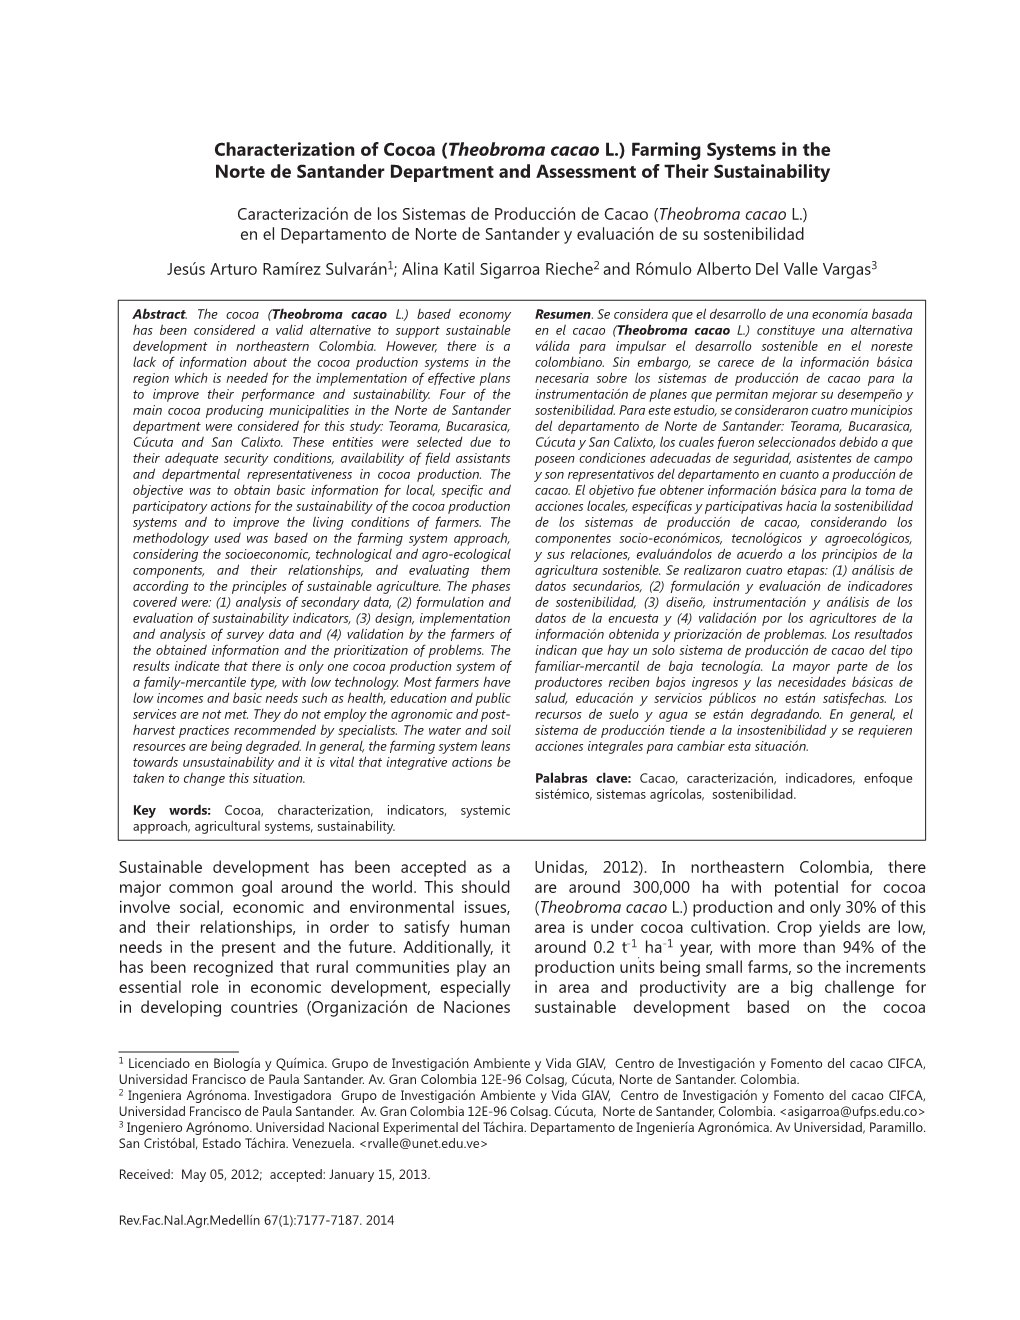 Characterization of Cocoa (Theobroma Cacao L.) Farming Systems in the Norte De Santander Department and Assessment of Their Sustainability